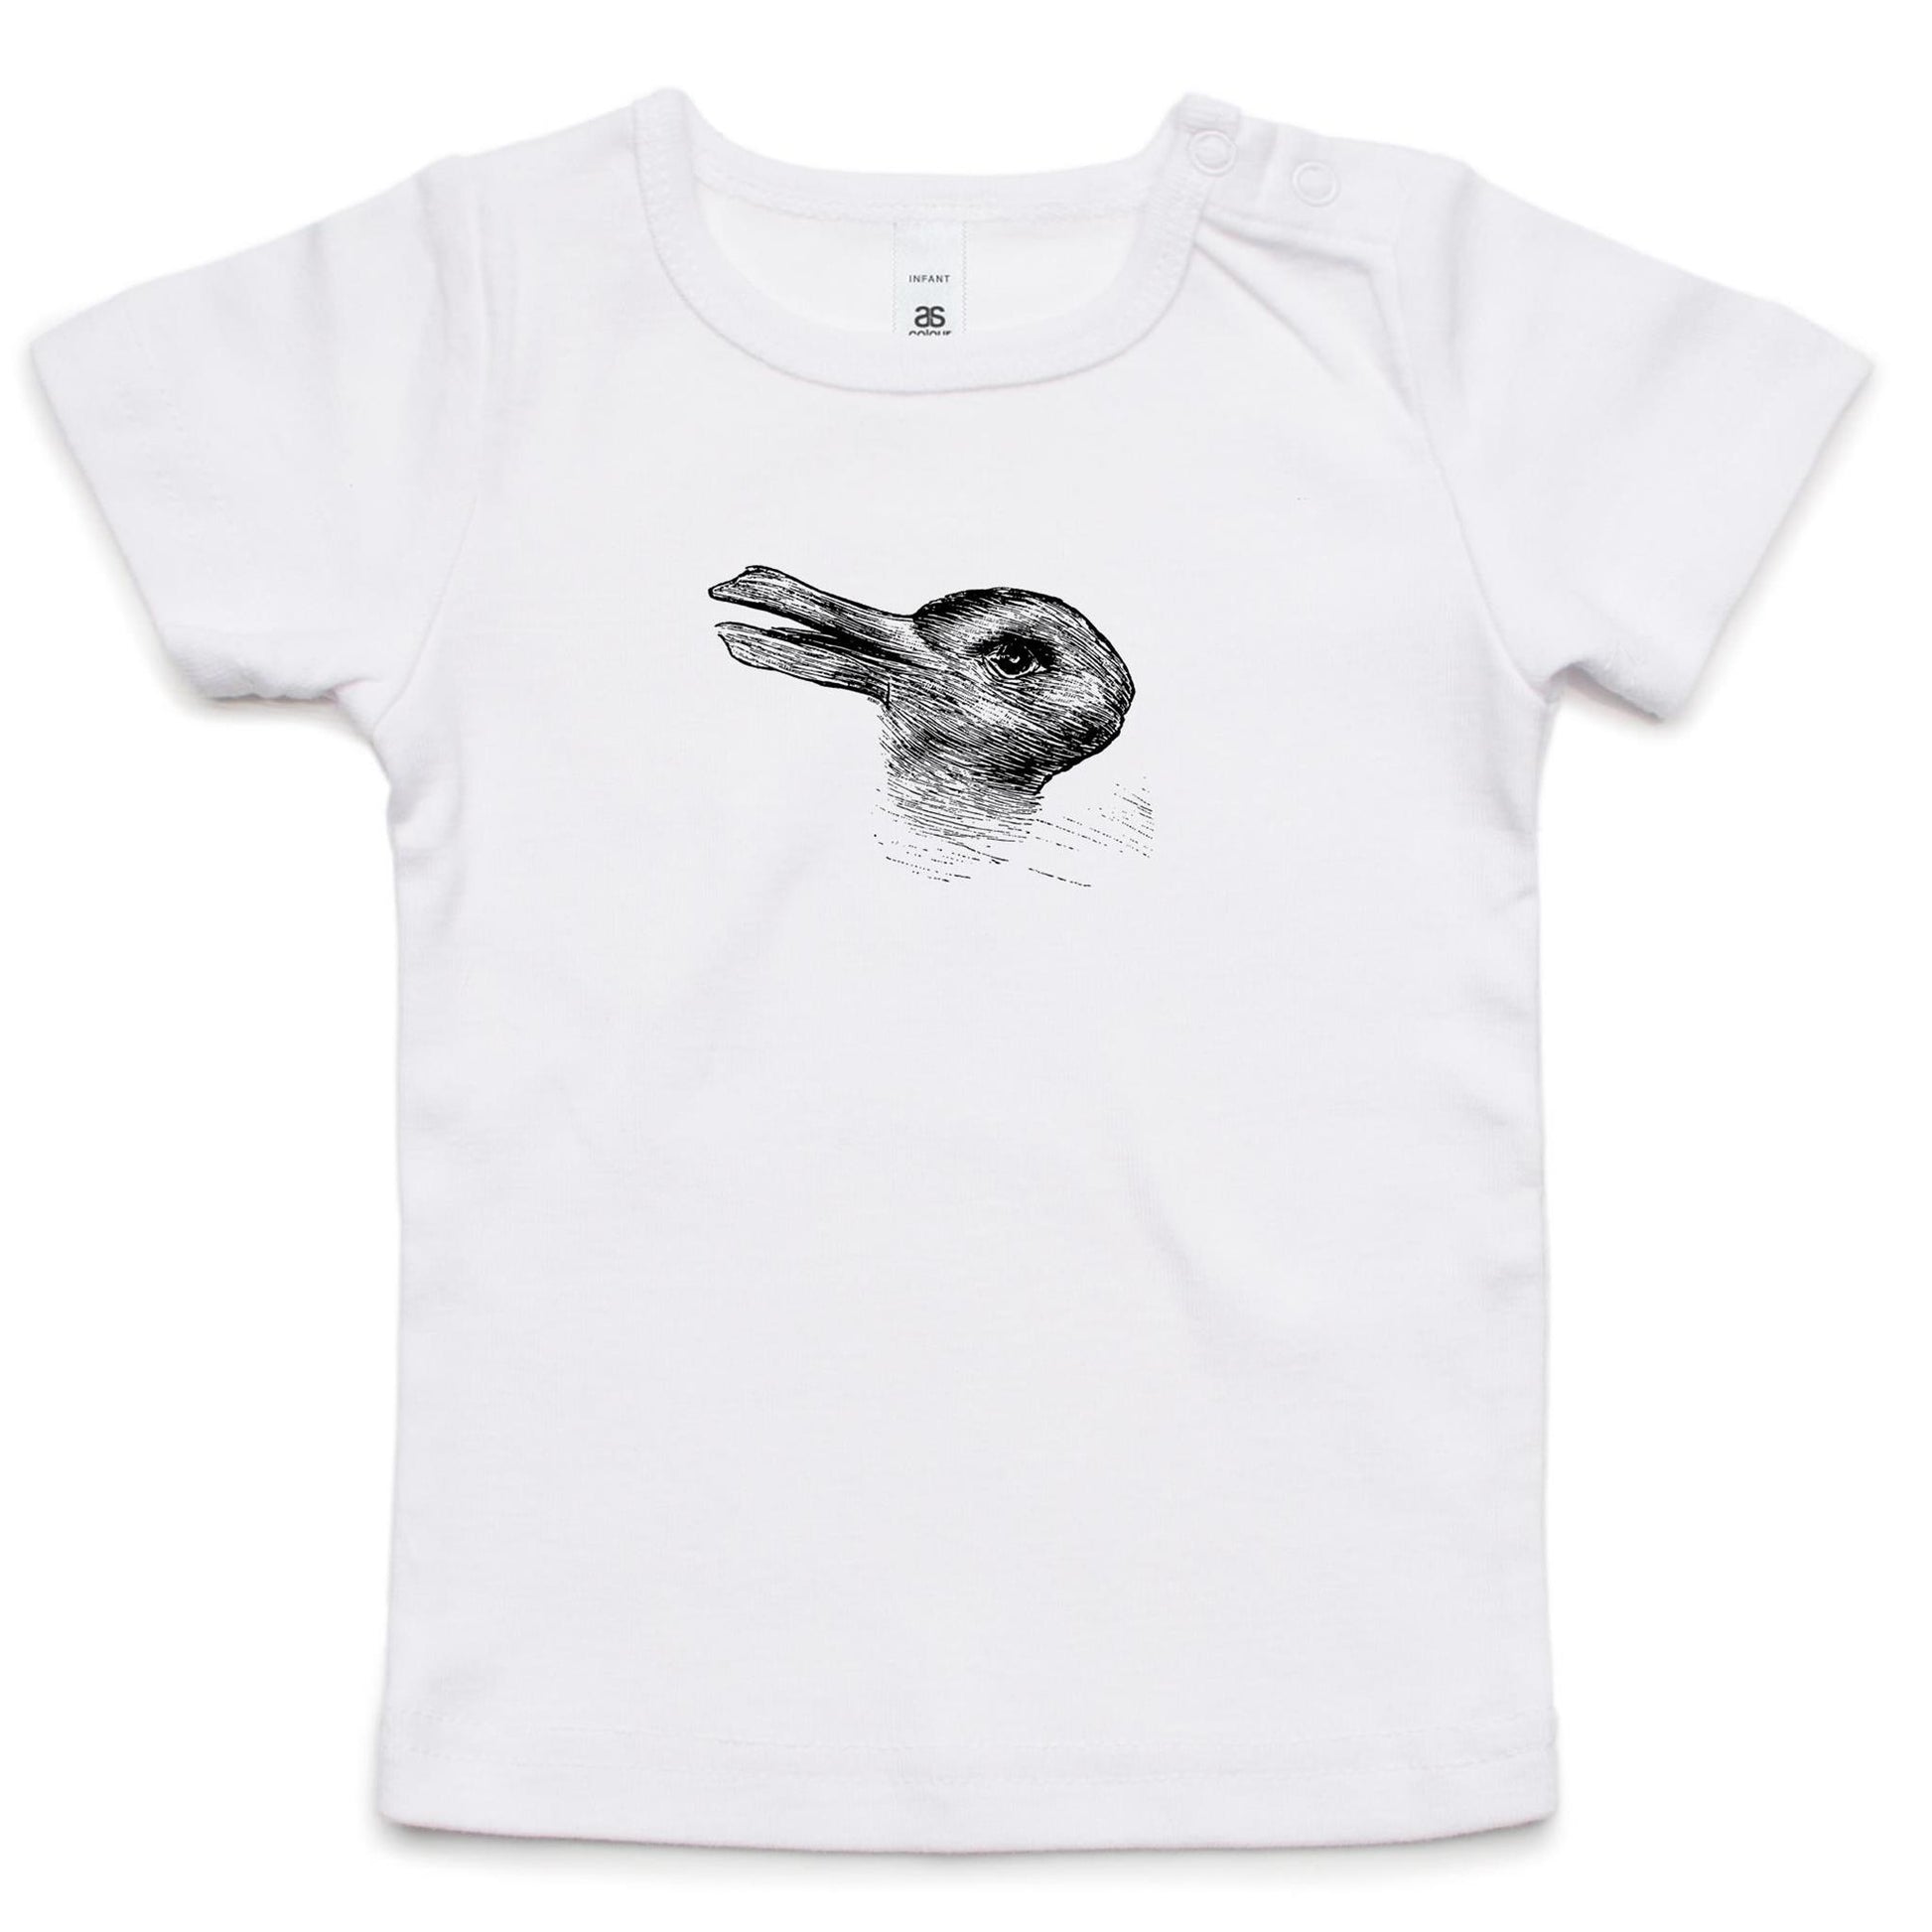 for Since REMO – Shirts Duck-Rabbit Babies 1988 T